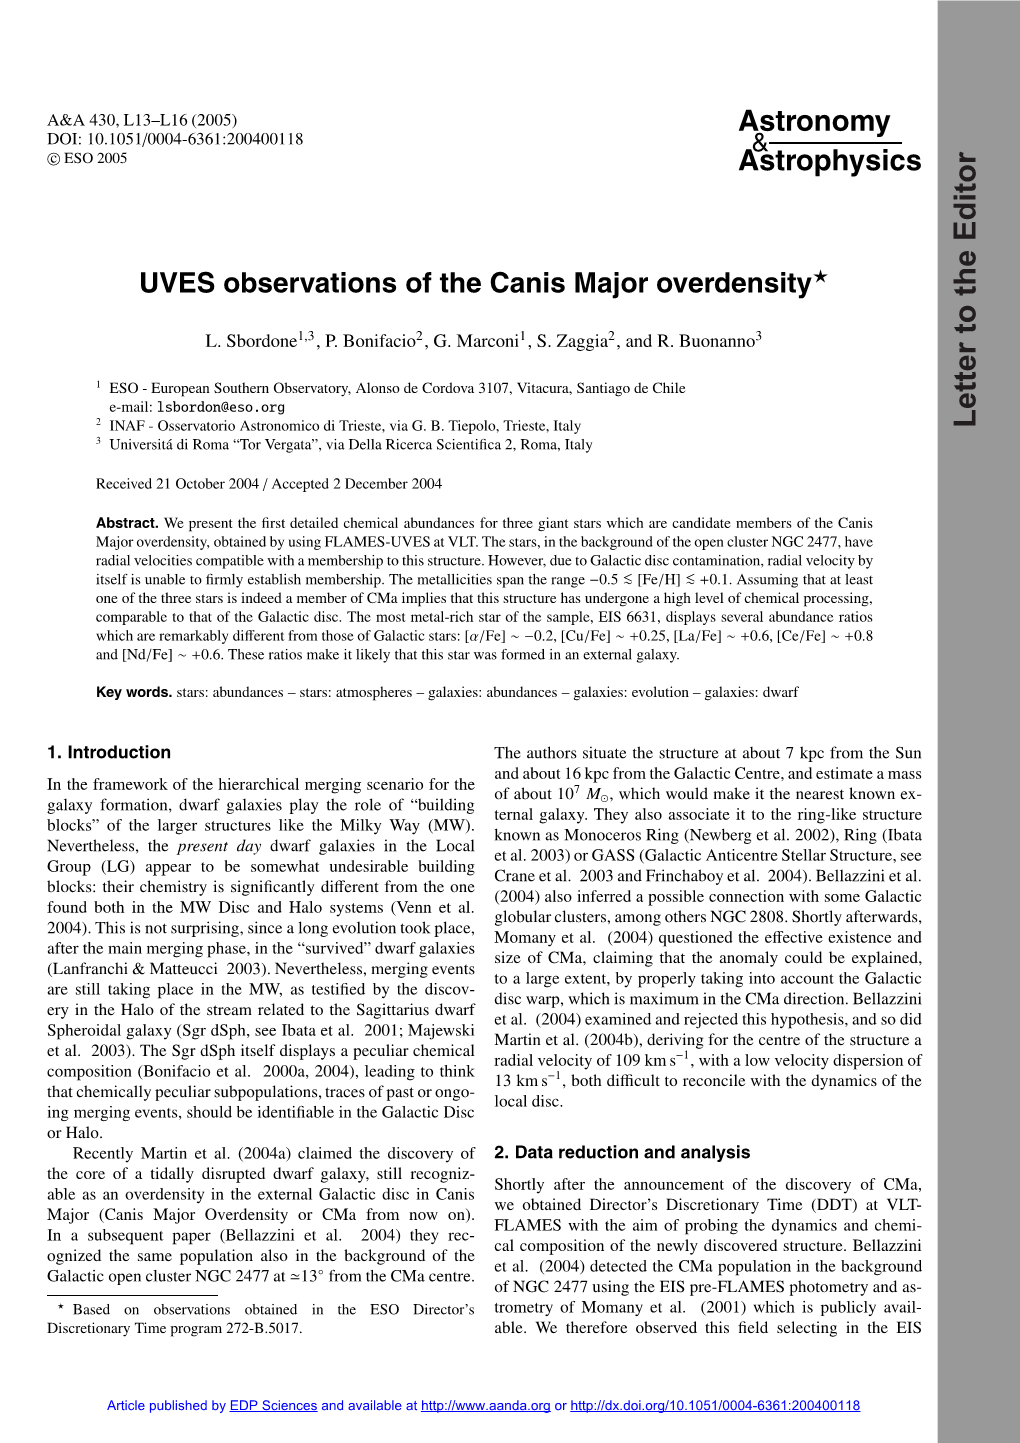 UVES Observations of the Canis Major Overdensity The